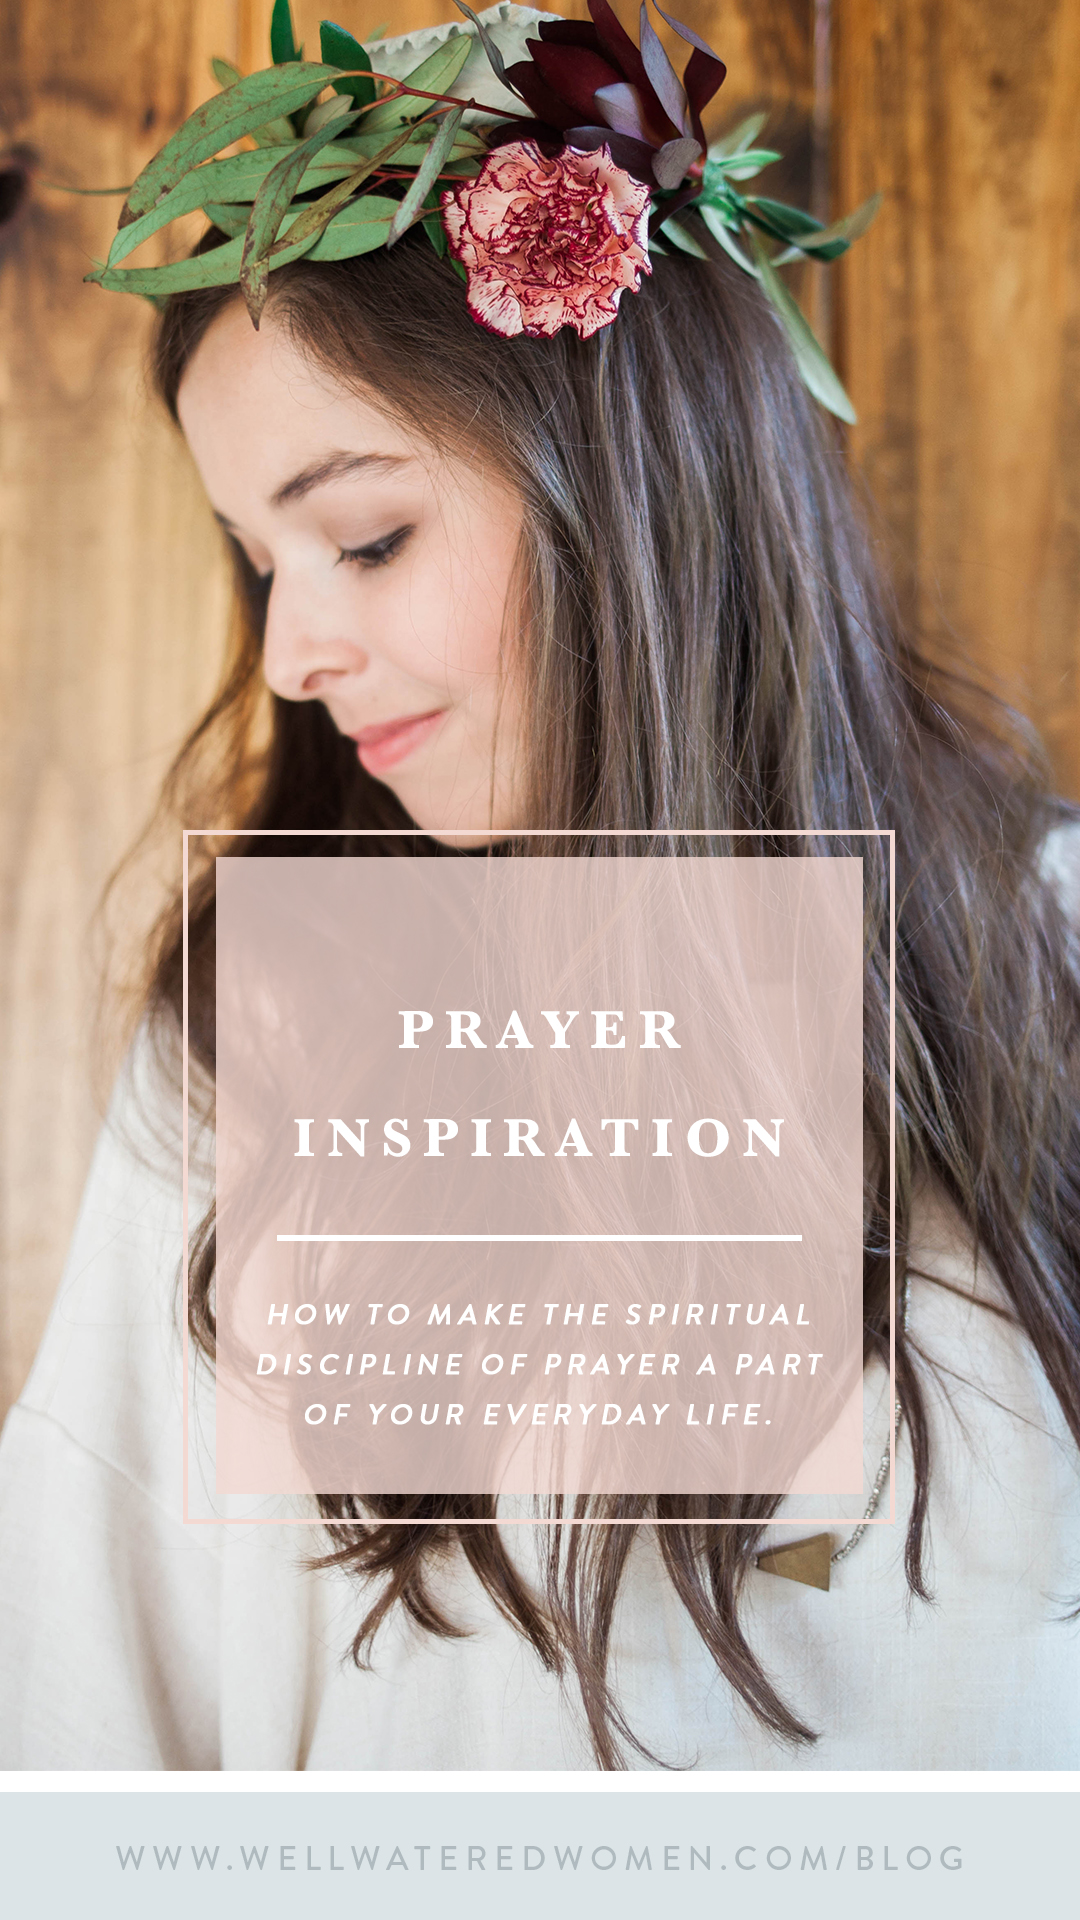 How to make the spiritual discipline of prayer a part of your everyday life!